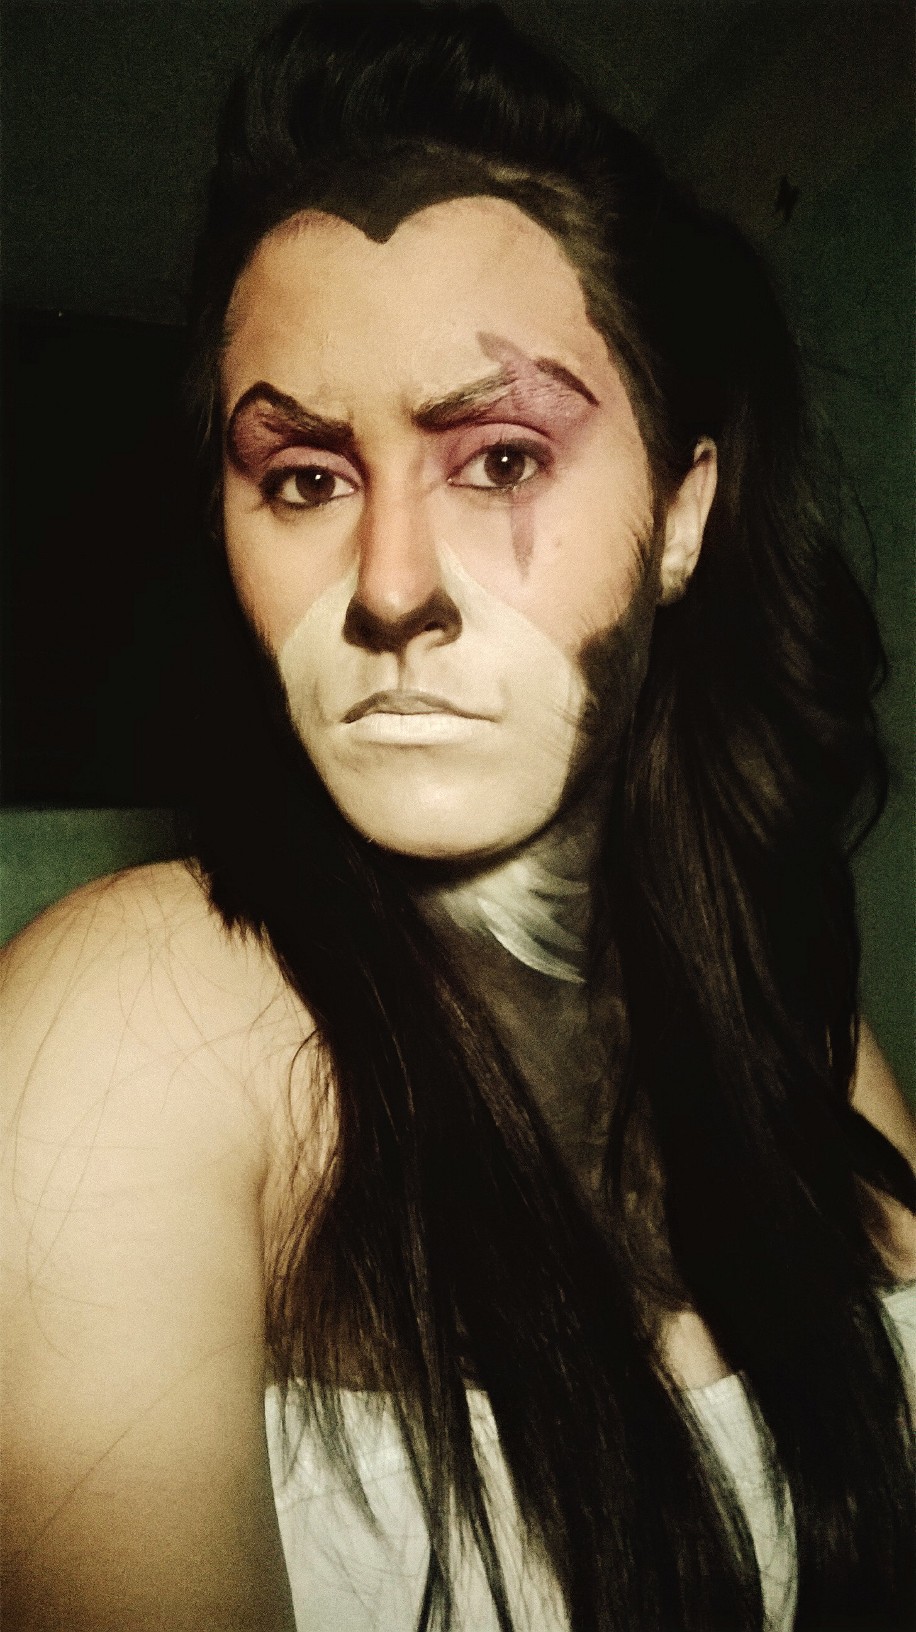 Scar makeup- lion king (closed mouth) by zombieloverkey on DeviantArt